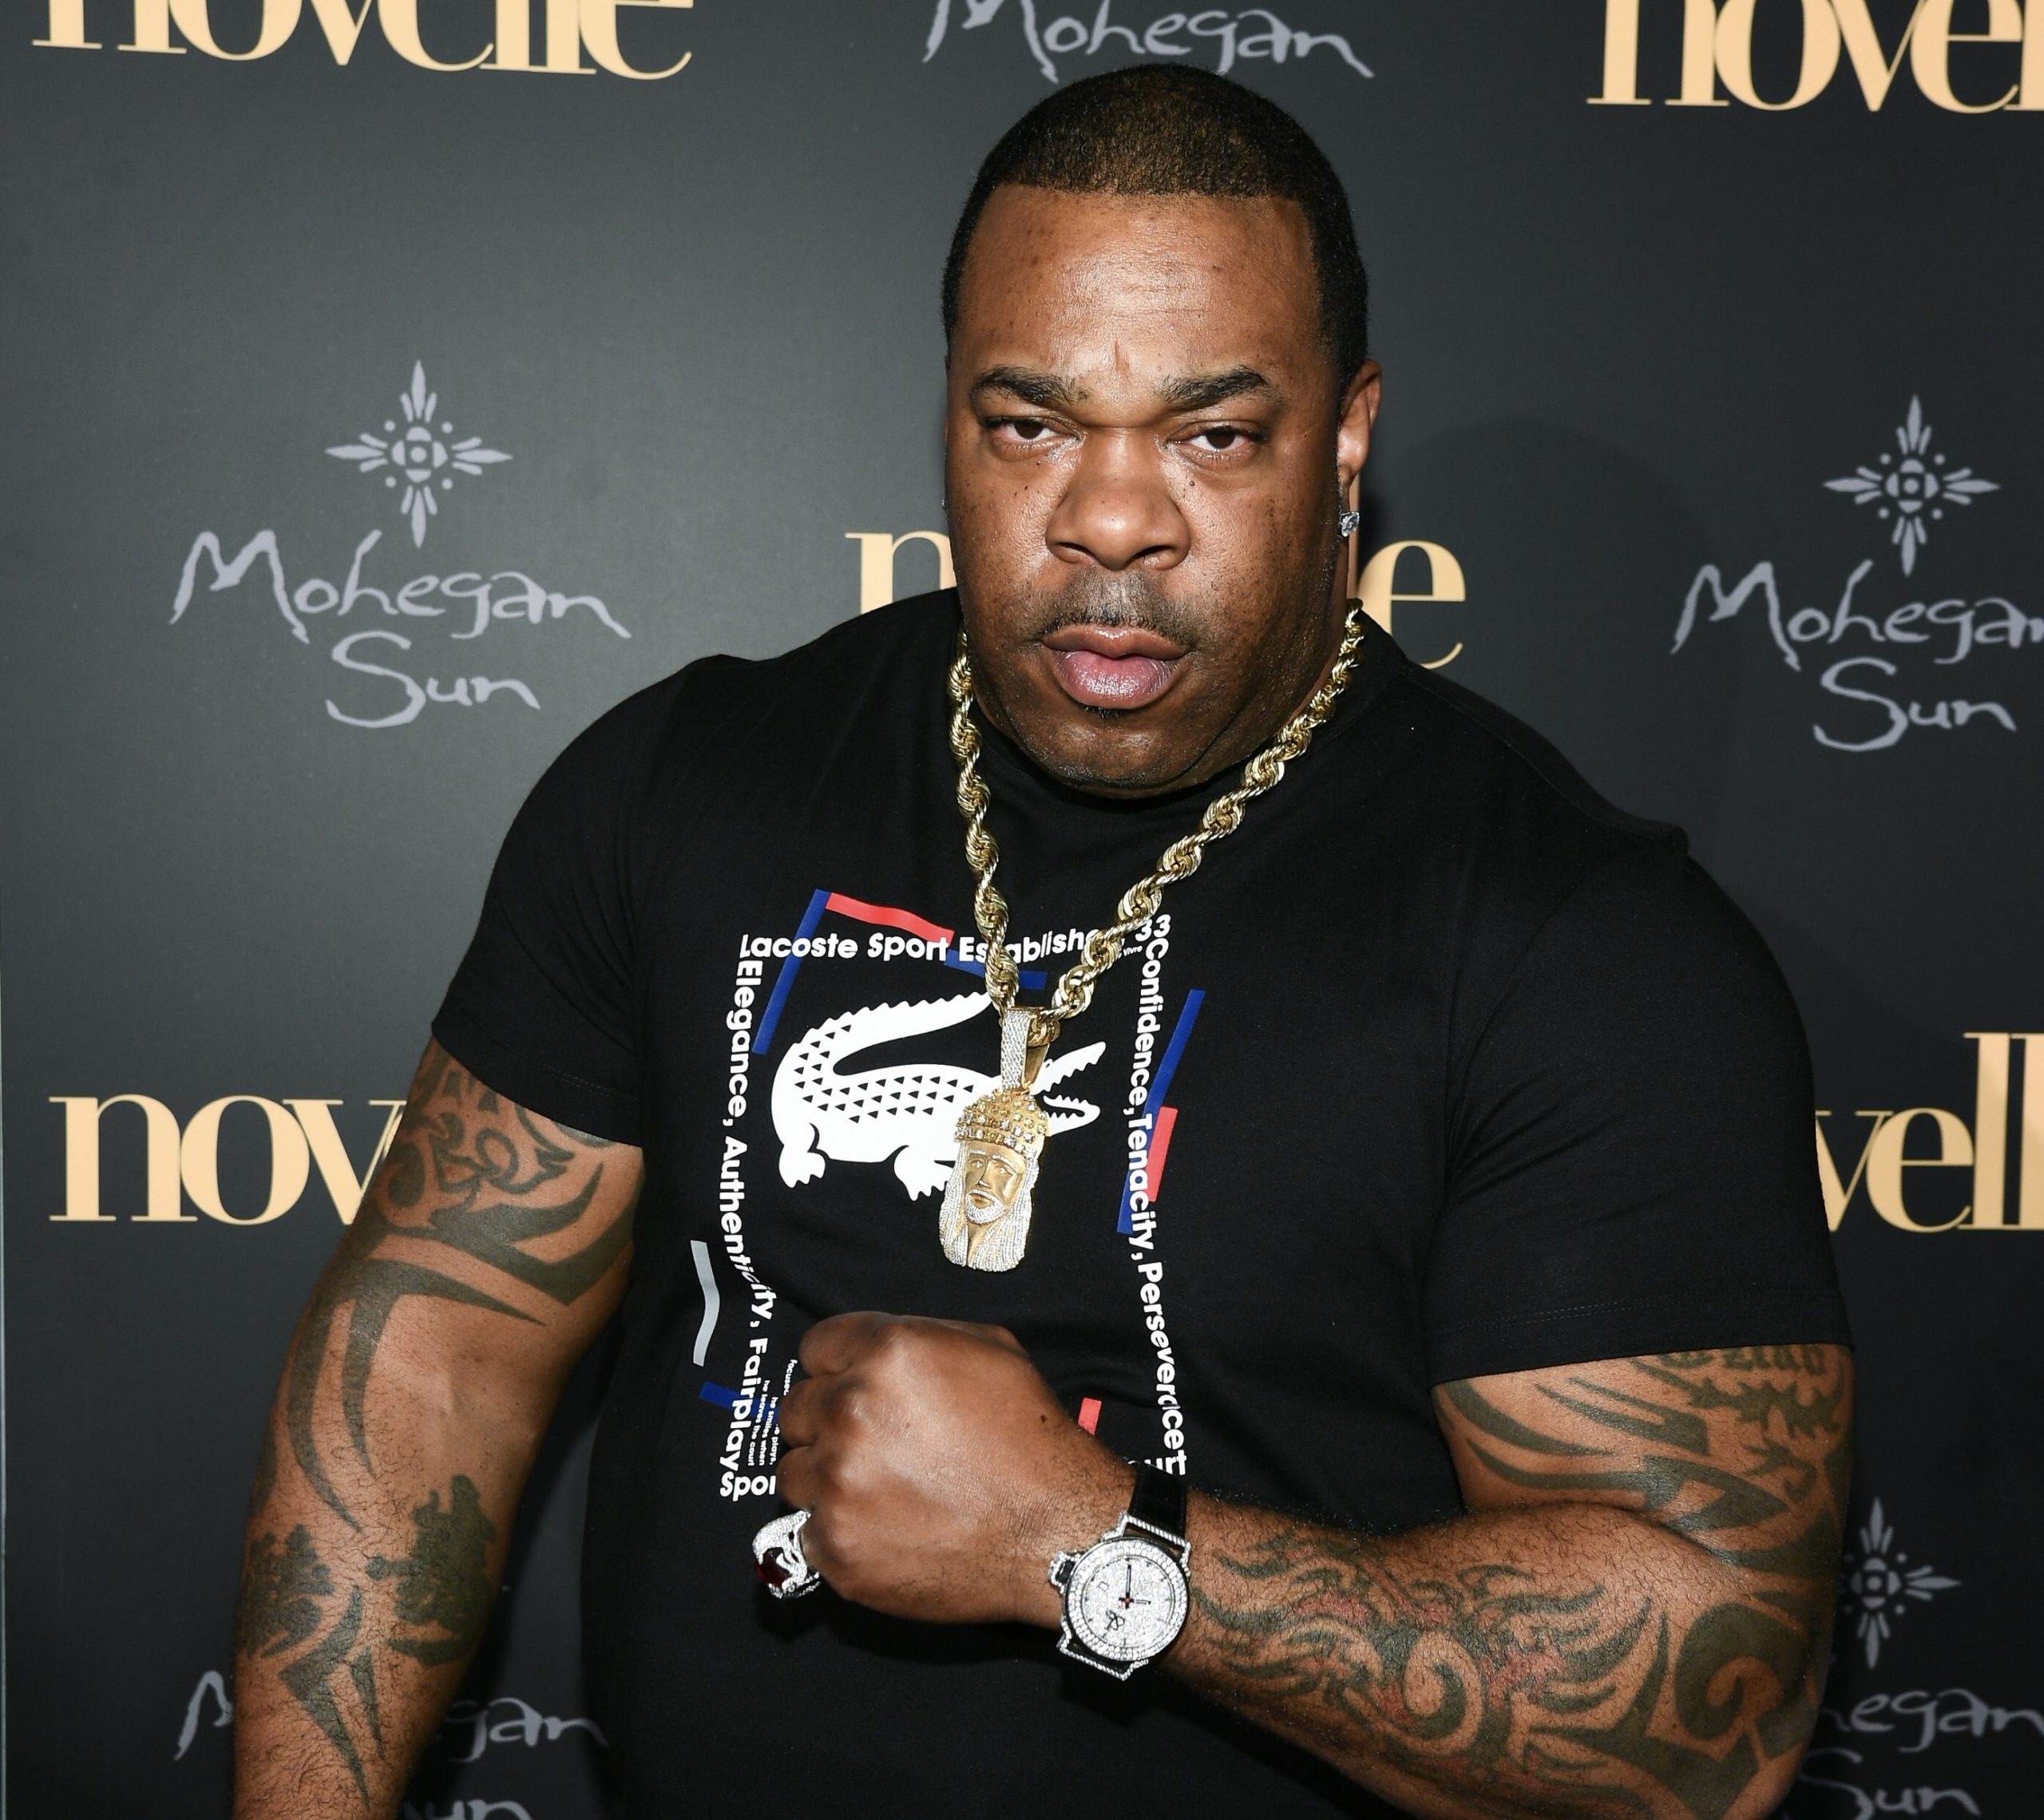 Busta Rhymes Says He Had A "Reality Check" About His Weight After Having To Duct Tape His Stomach For A Music Video